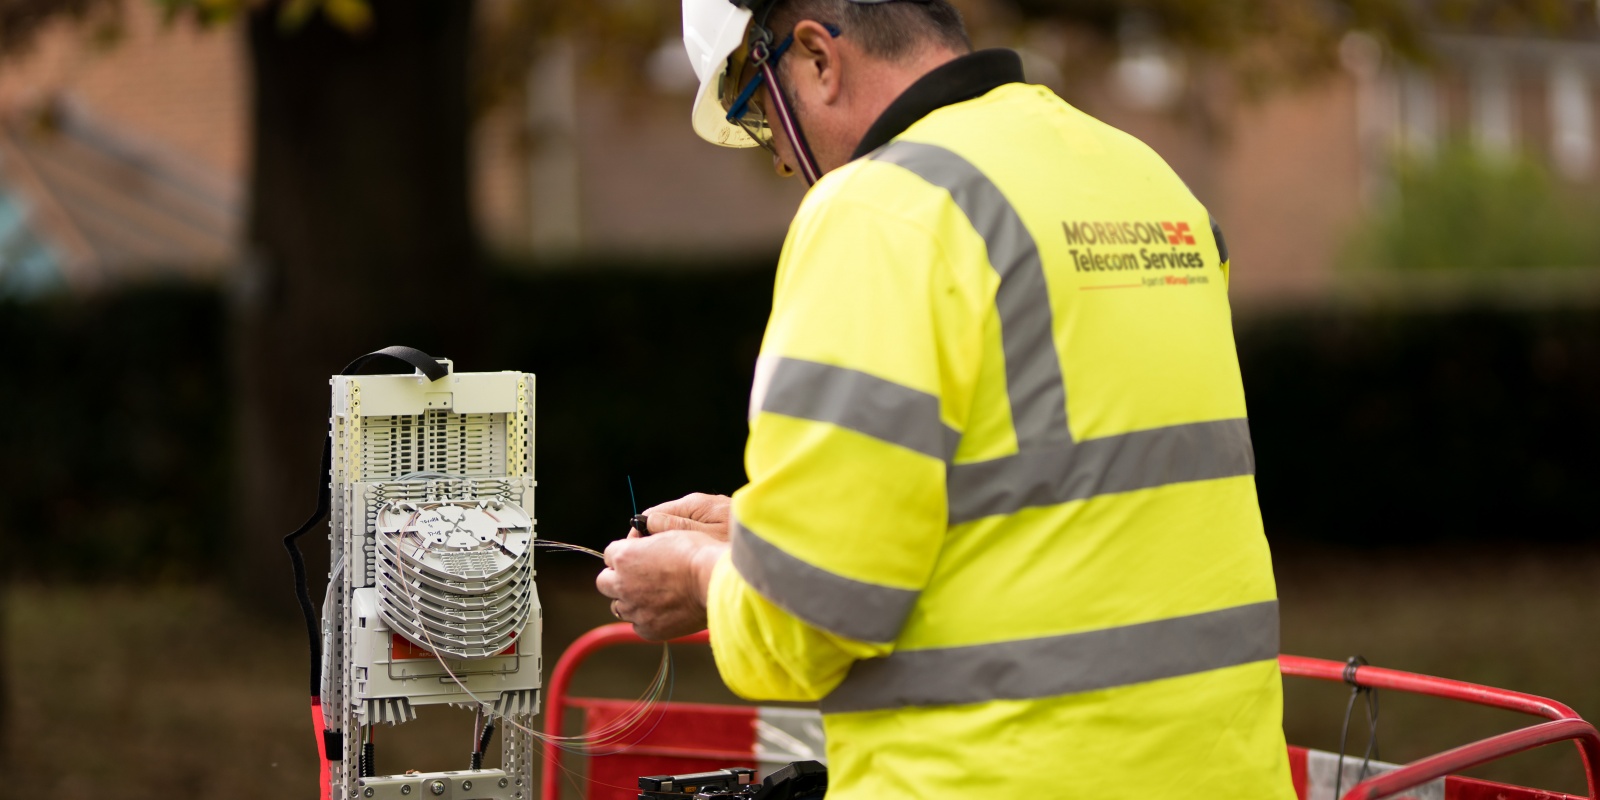 Morrison Telecom Services Secures Major Framework Contract with Openreach